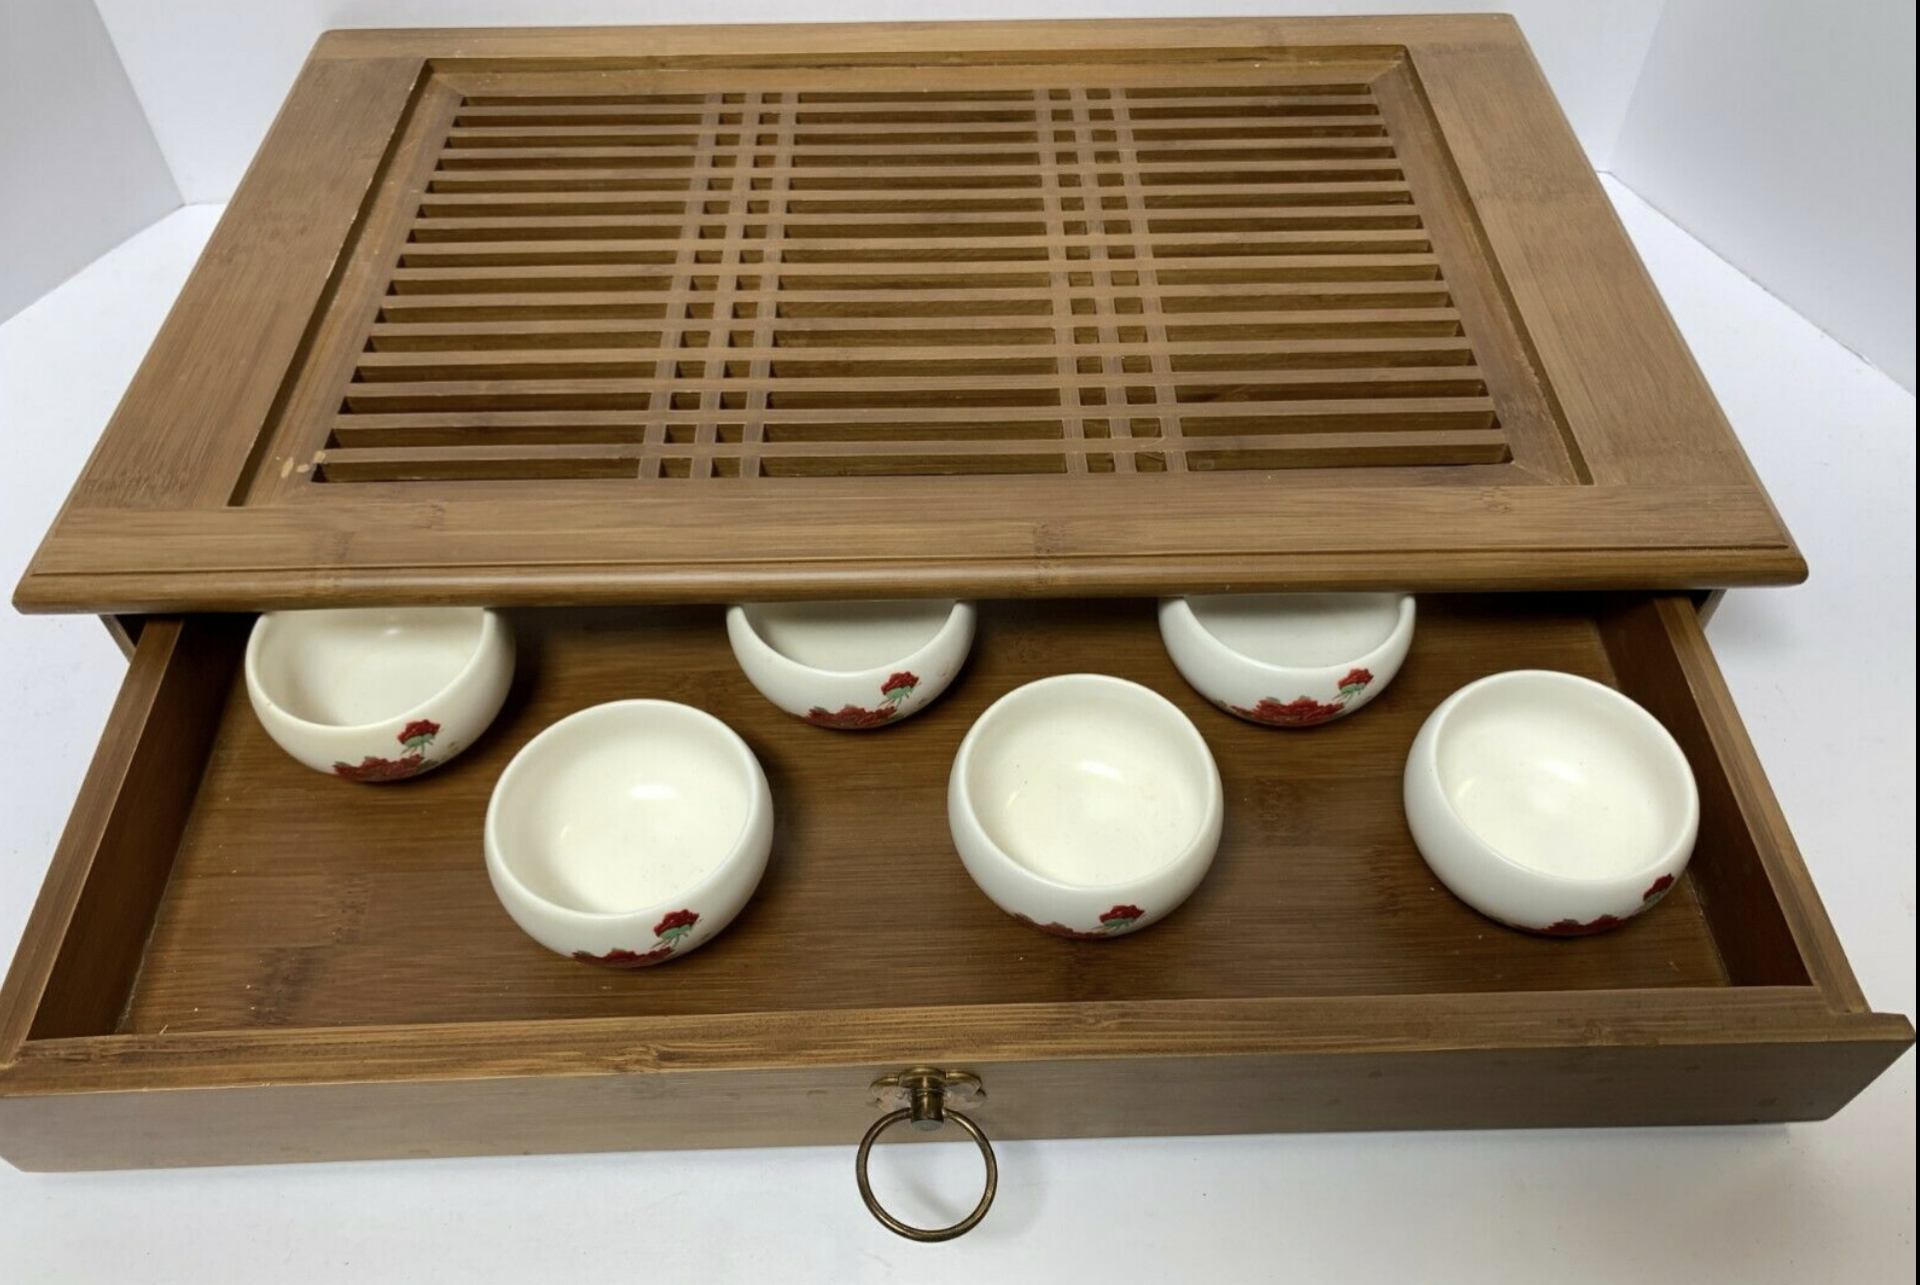 Eilong Taiwan 1987 Tea Cup Set of 6, with Wood Display Storage Unit with Drawer - Image 4 of 7